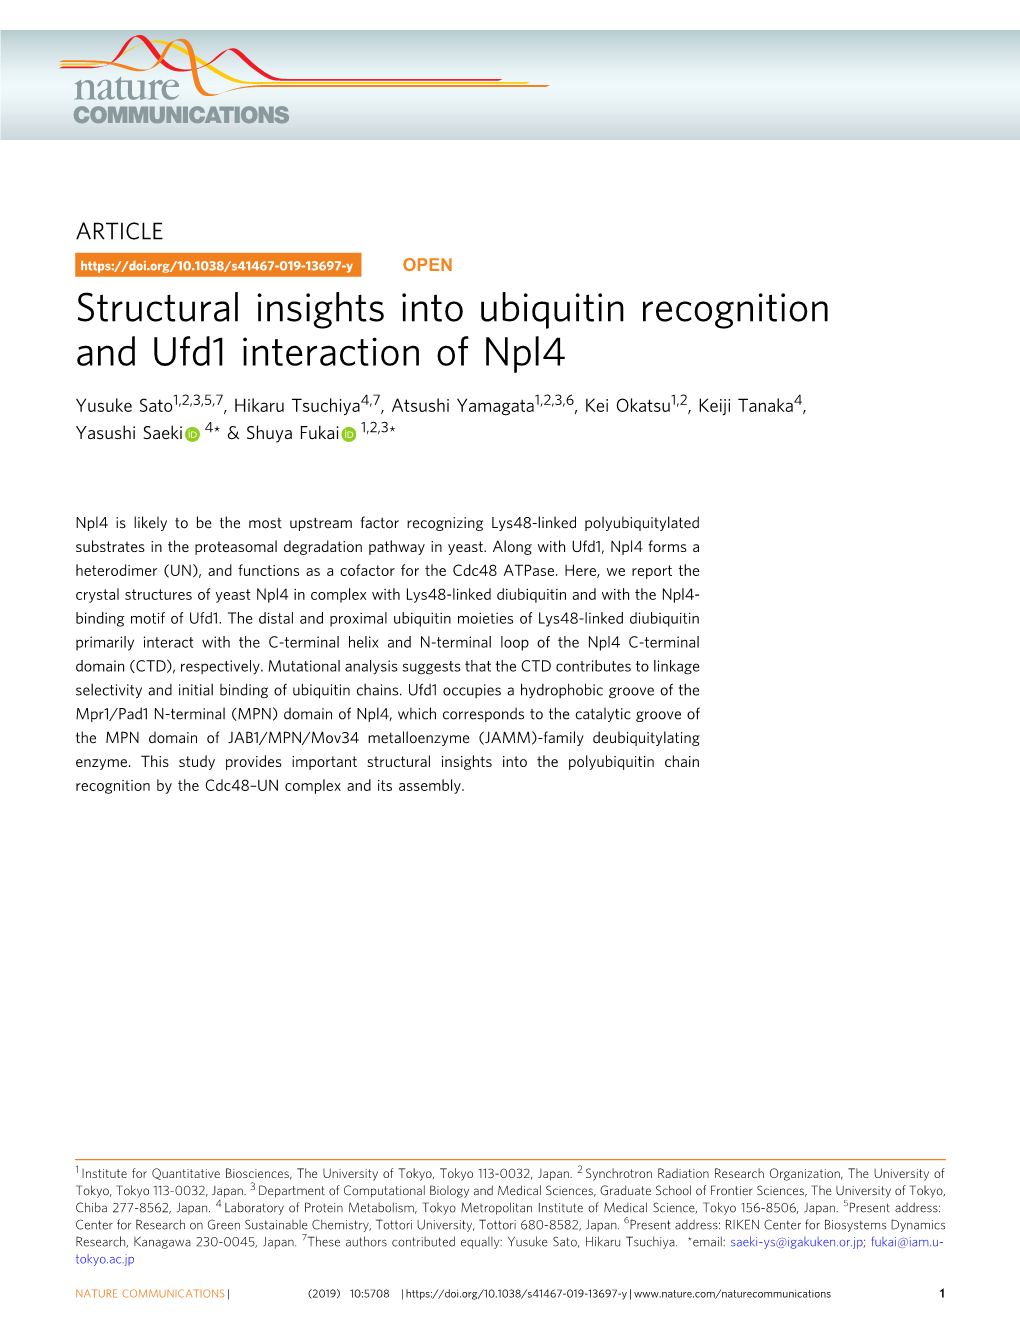 Structural Insights Into Ubiquitin Recognition and Ufd1 Interaction of Npl4